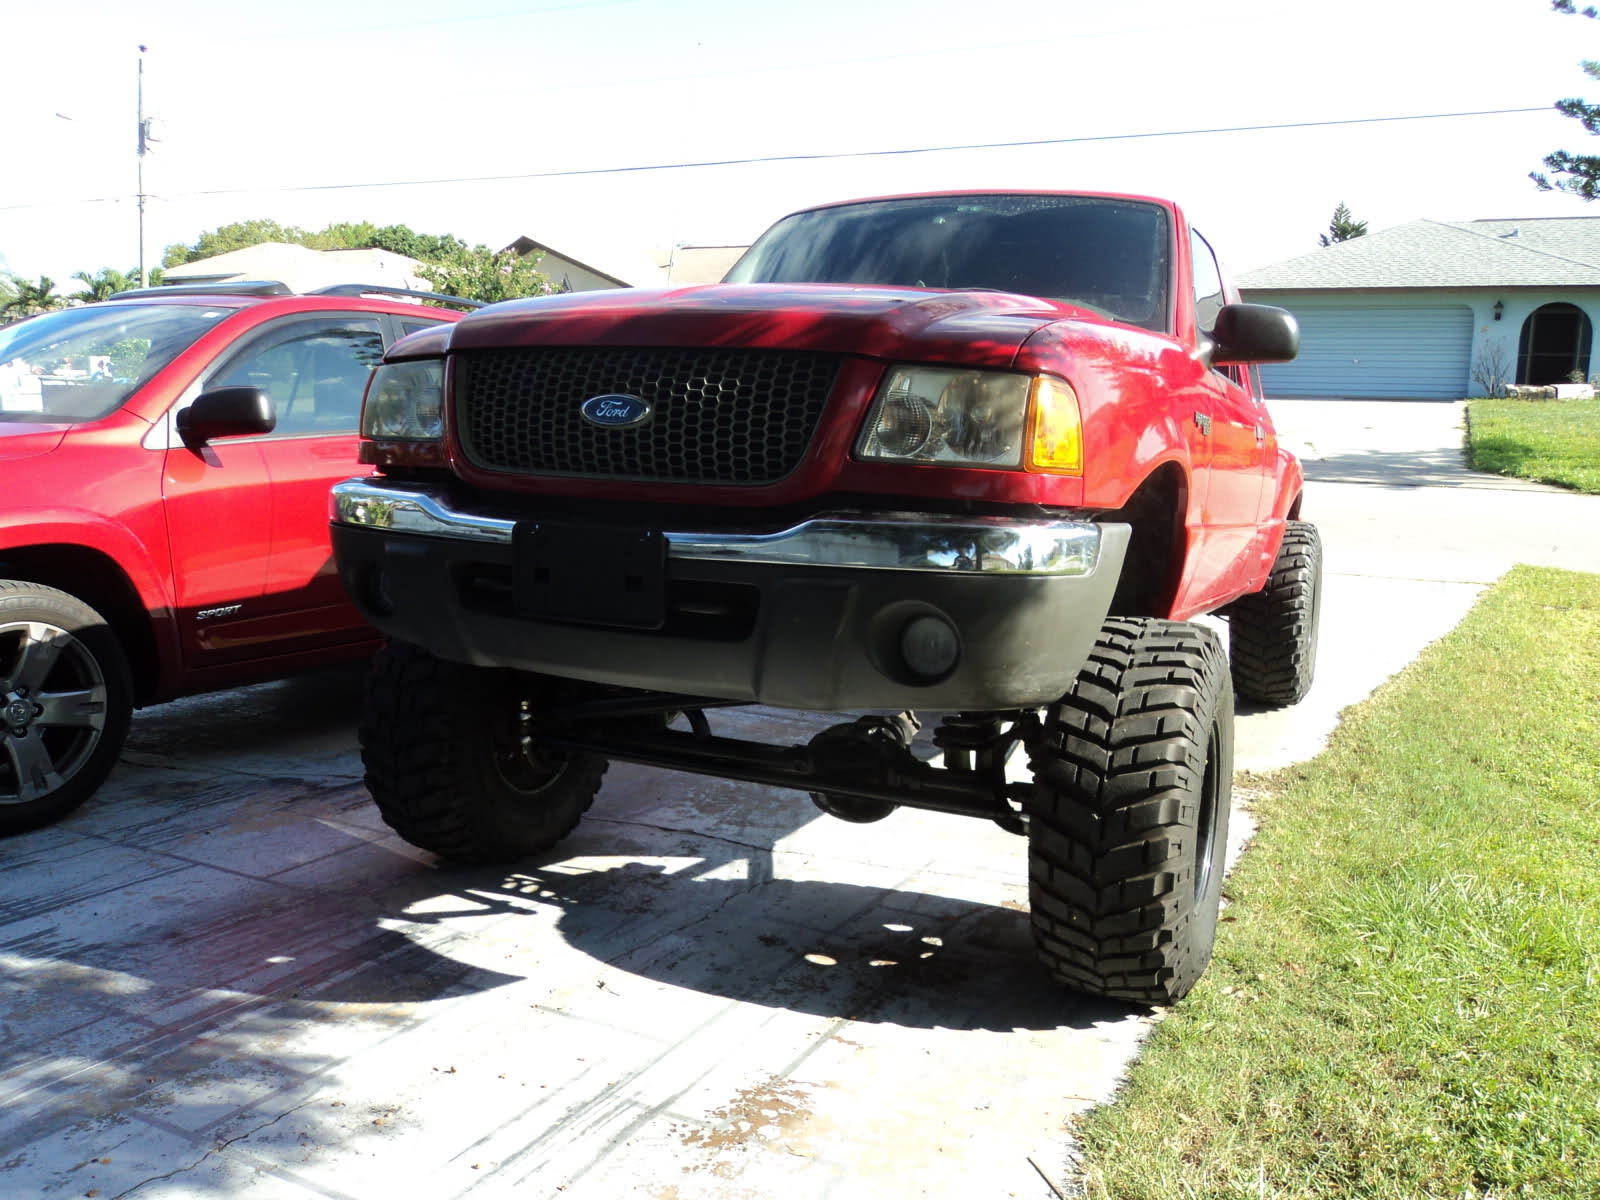 2 Inch wheel spacers ford ranger #6